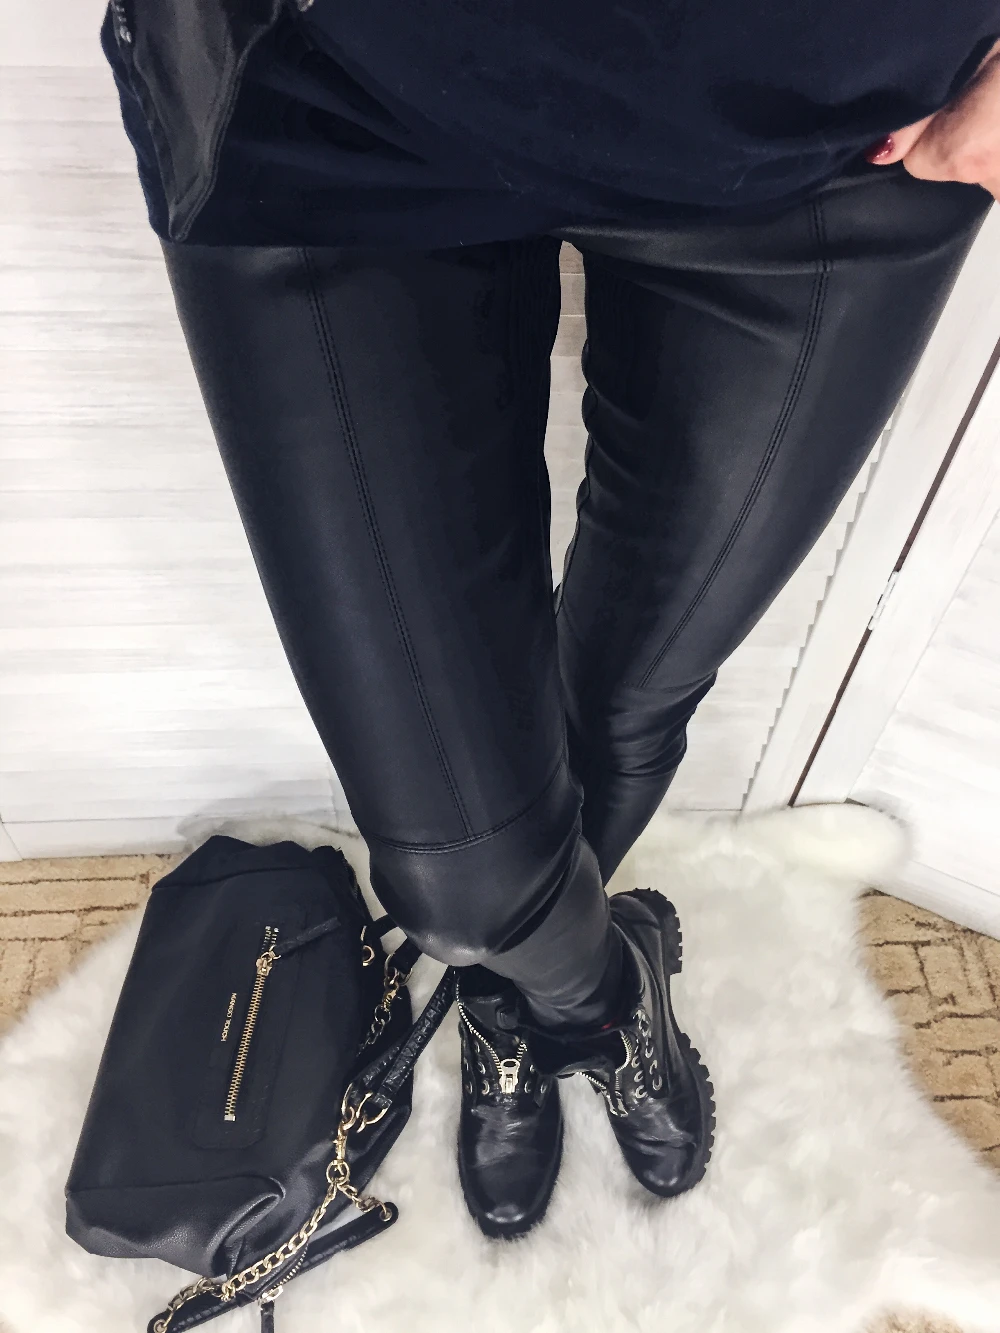 WOTWOY High Quality Tight Leather Pants Women Autumn PU Leather Trousers Side Zippers 2017 Silver Black Pencil Pants High Waist